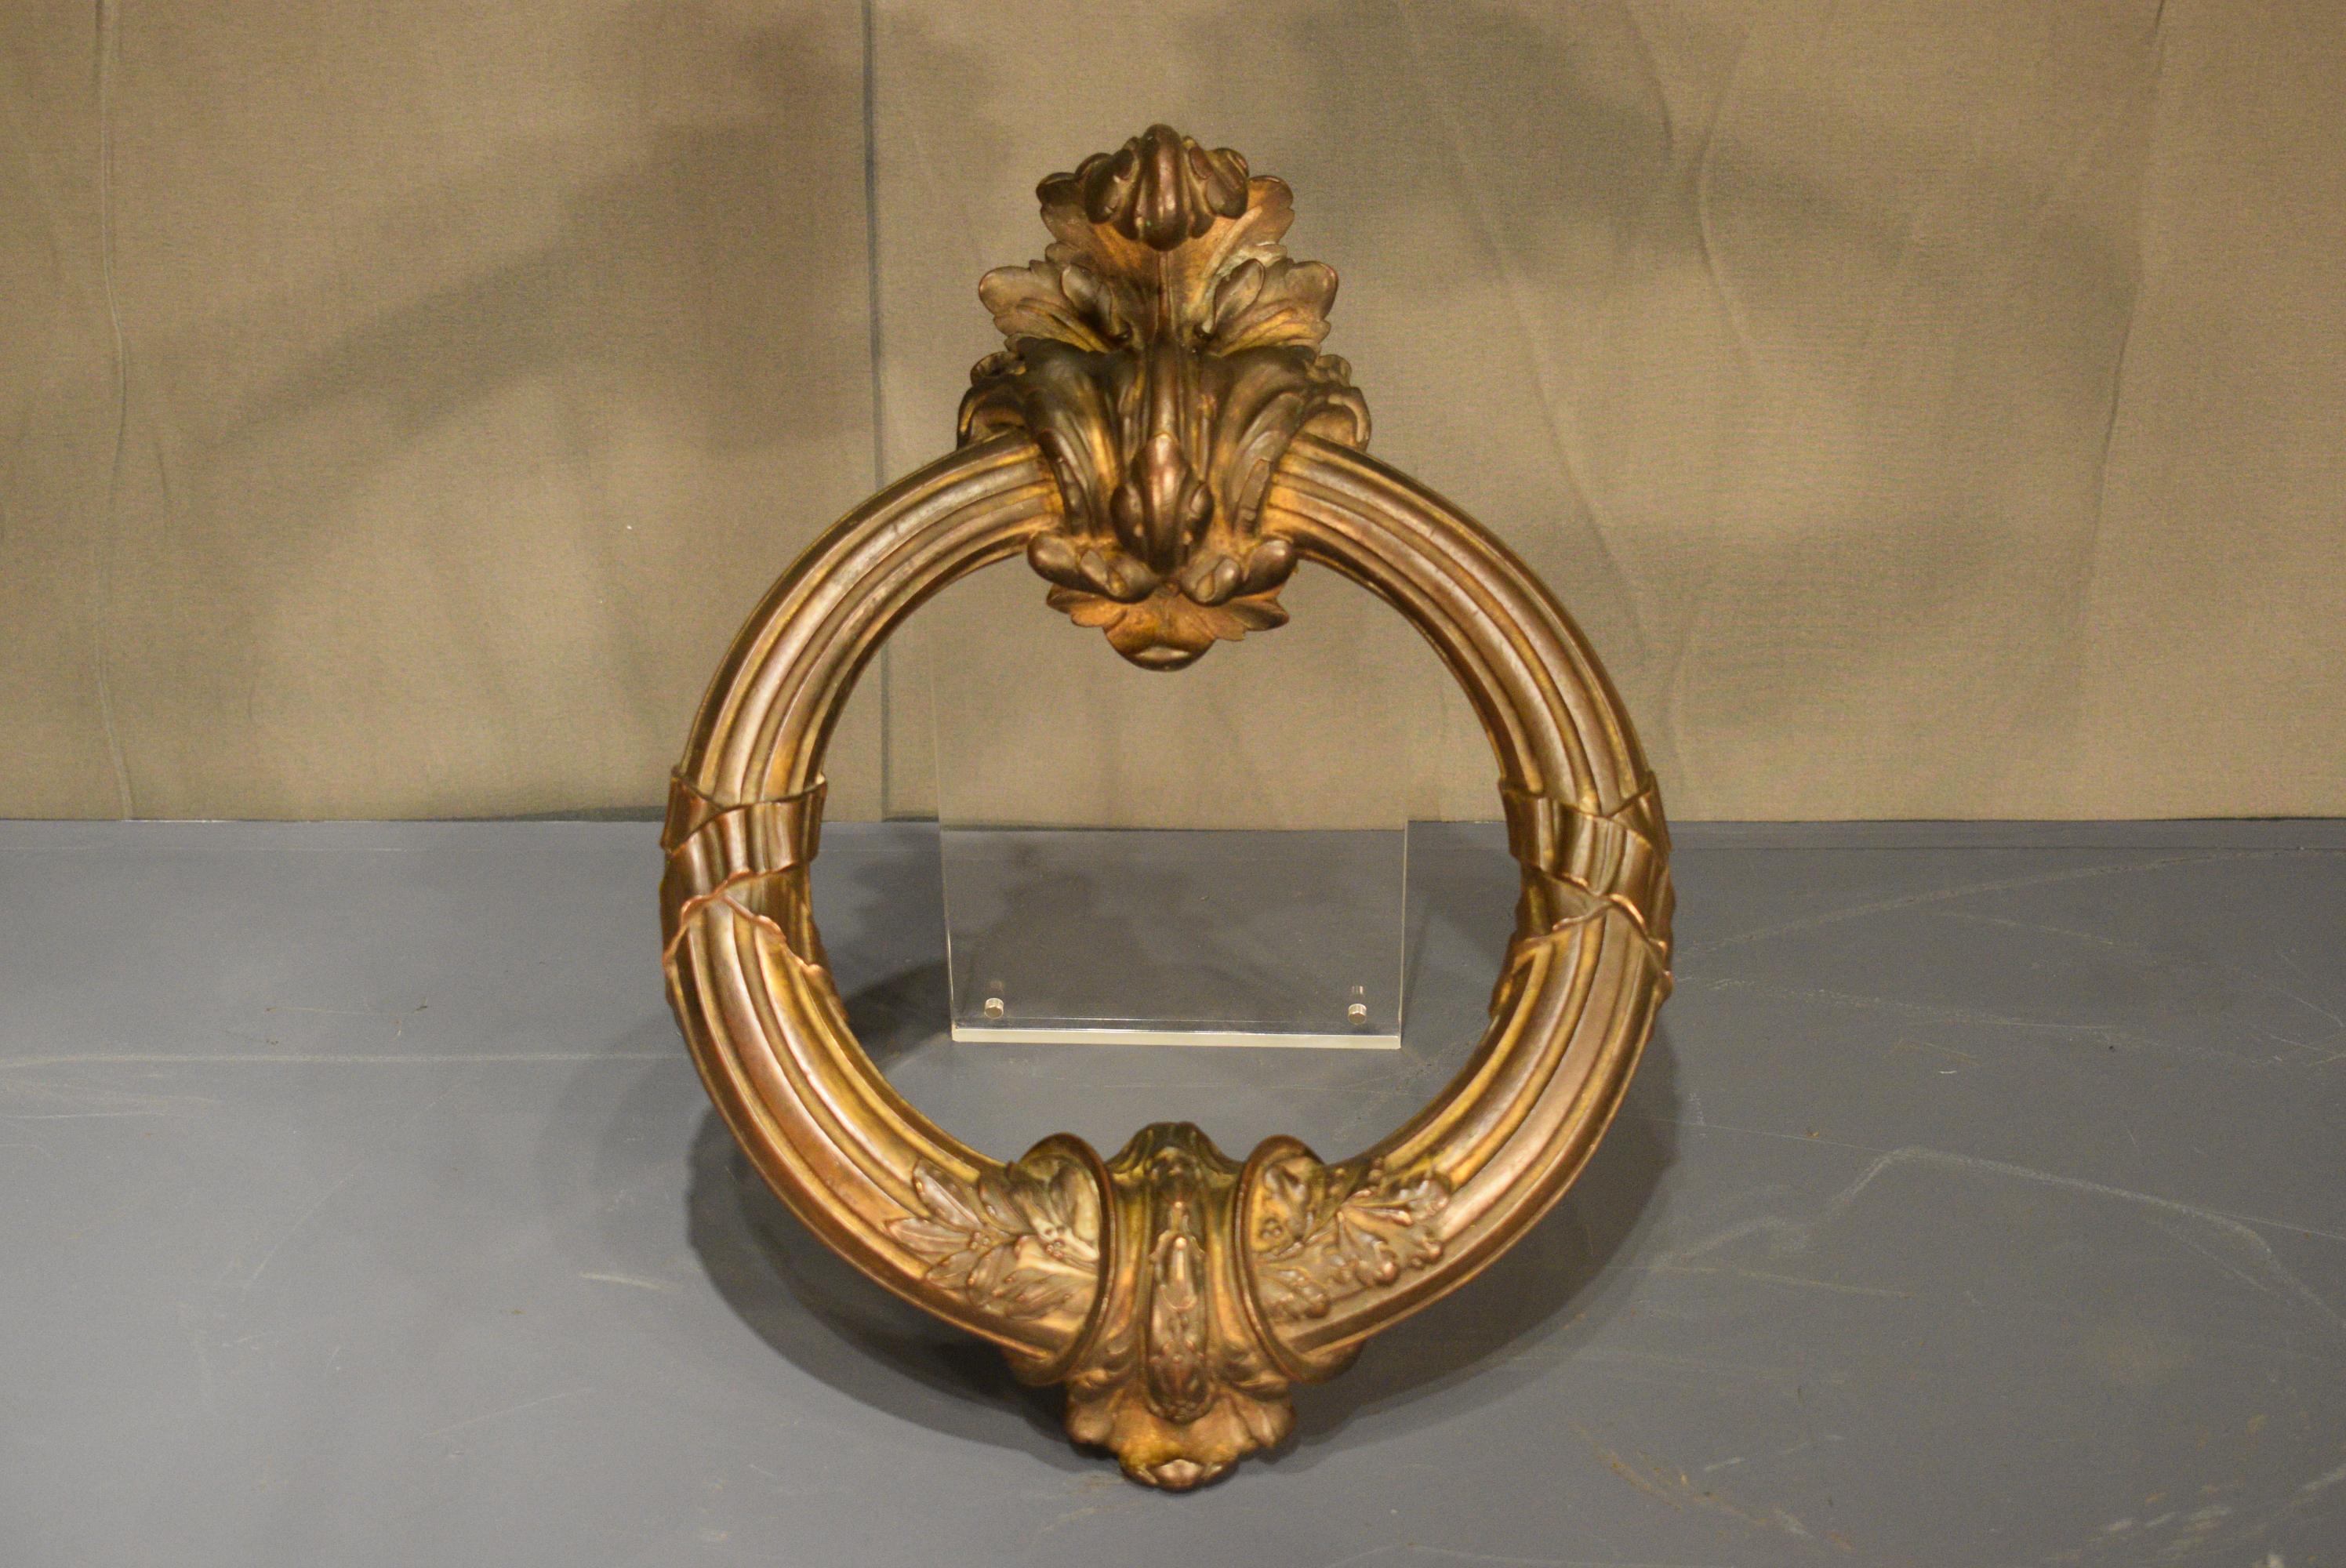 A very fine and decorative gilt bronze door knocker in the Louis XVI style, France, circa 1910
CW3503.